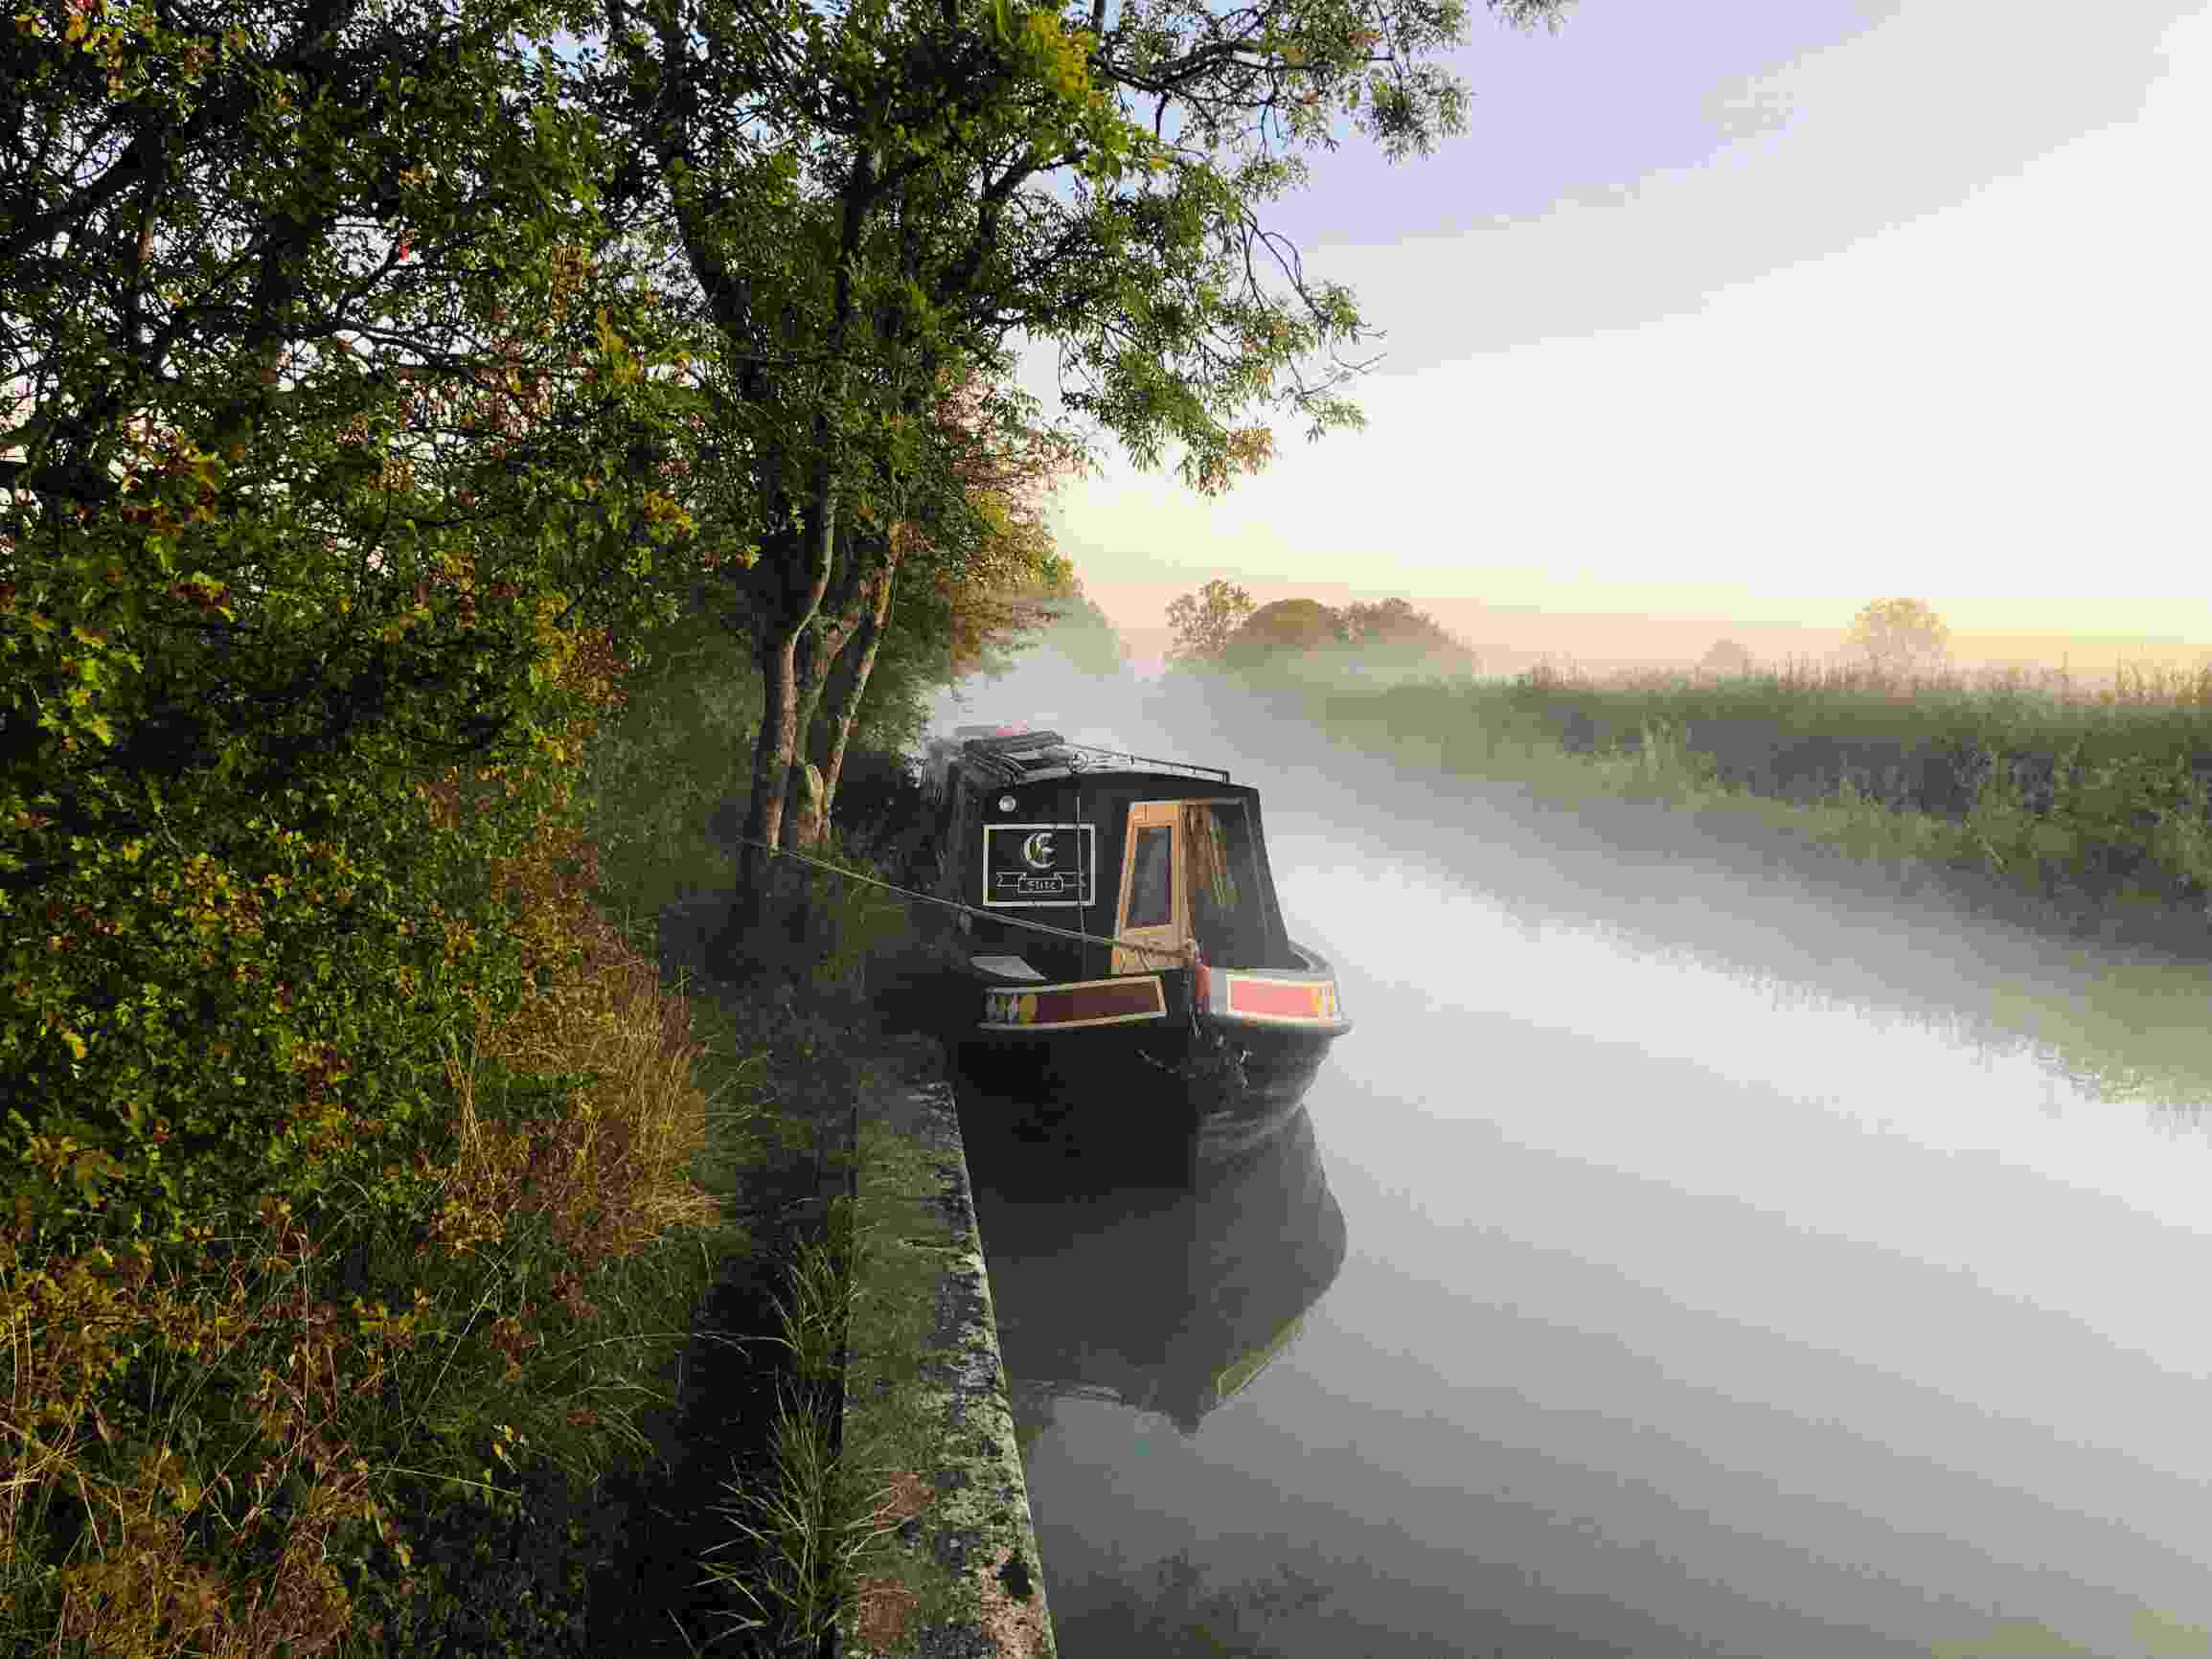 A moored canal boat against a mist-covered water surface